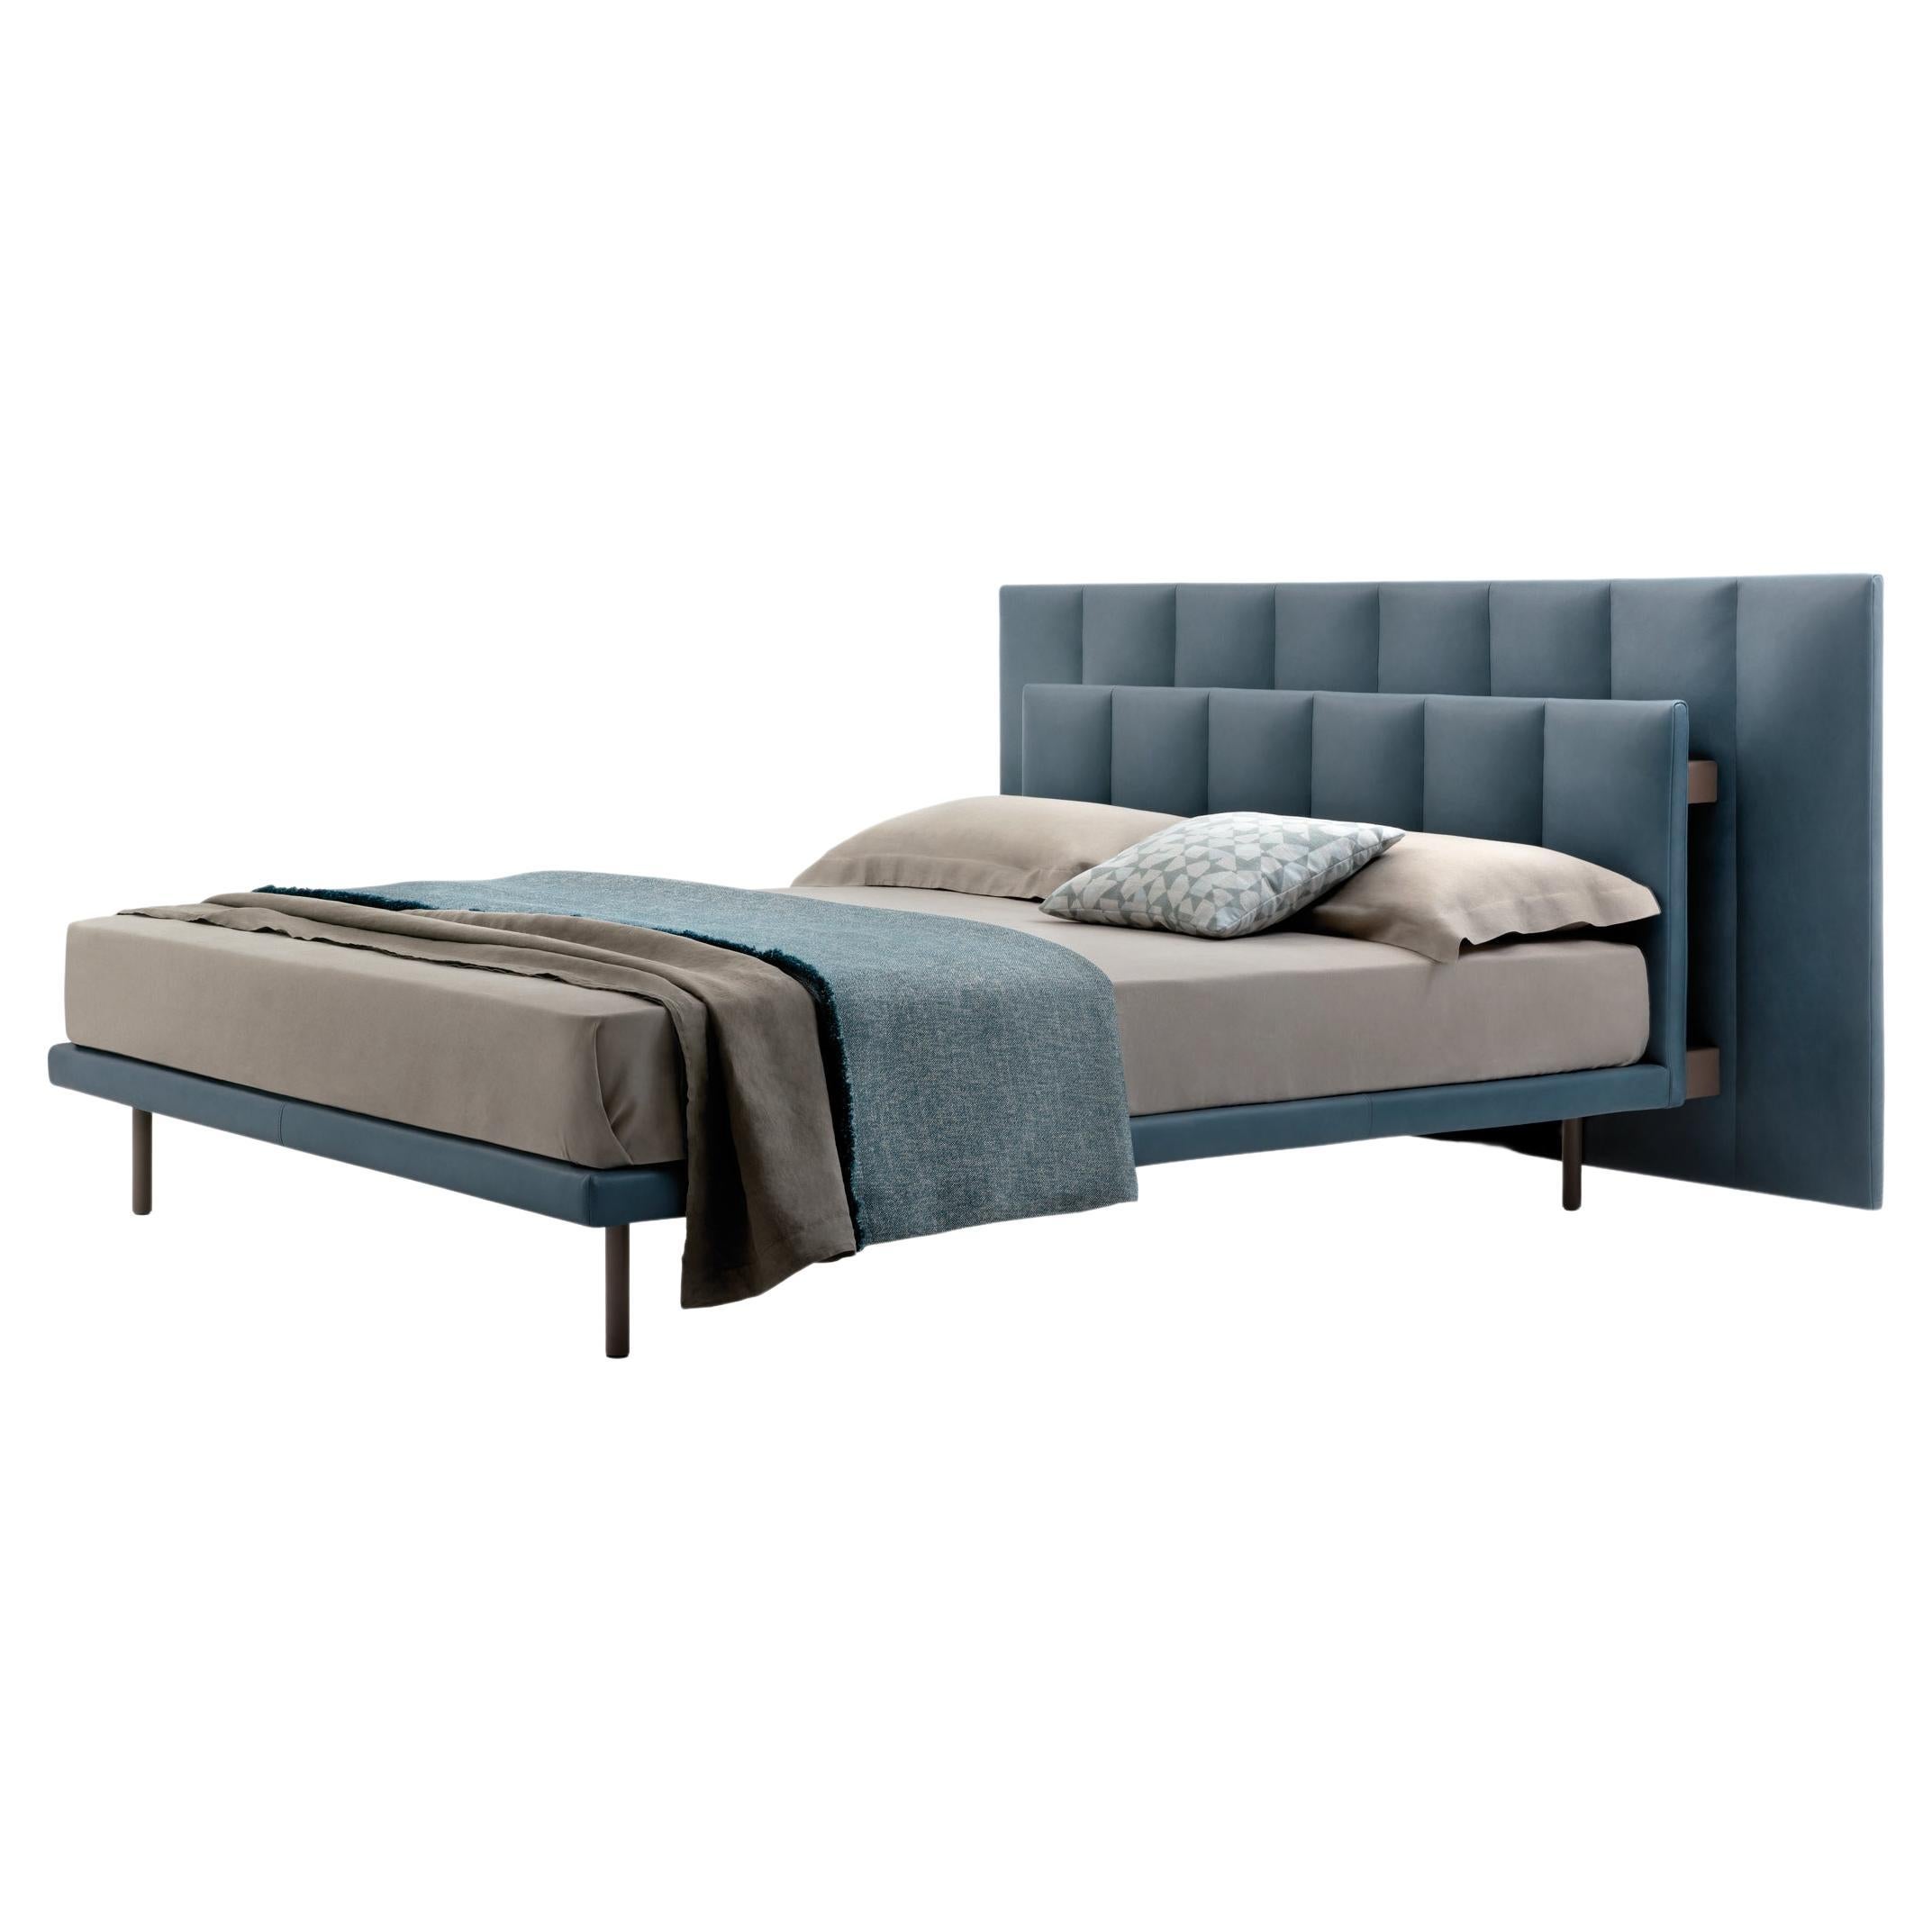 Zanotta Large Grangala Bed with Separate Springing in Grey Upholstery